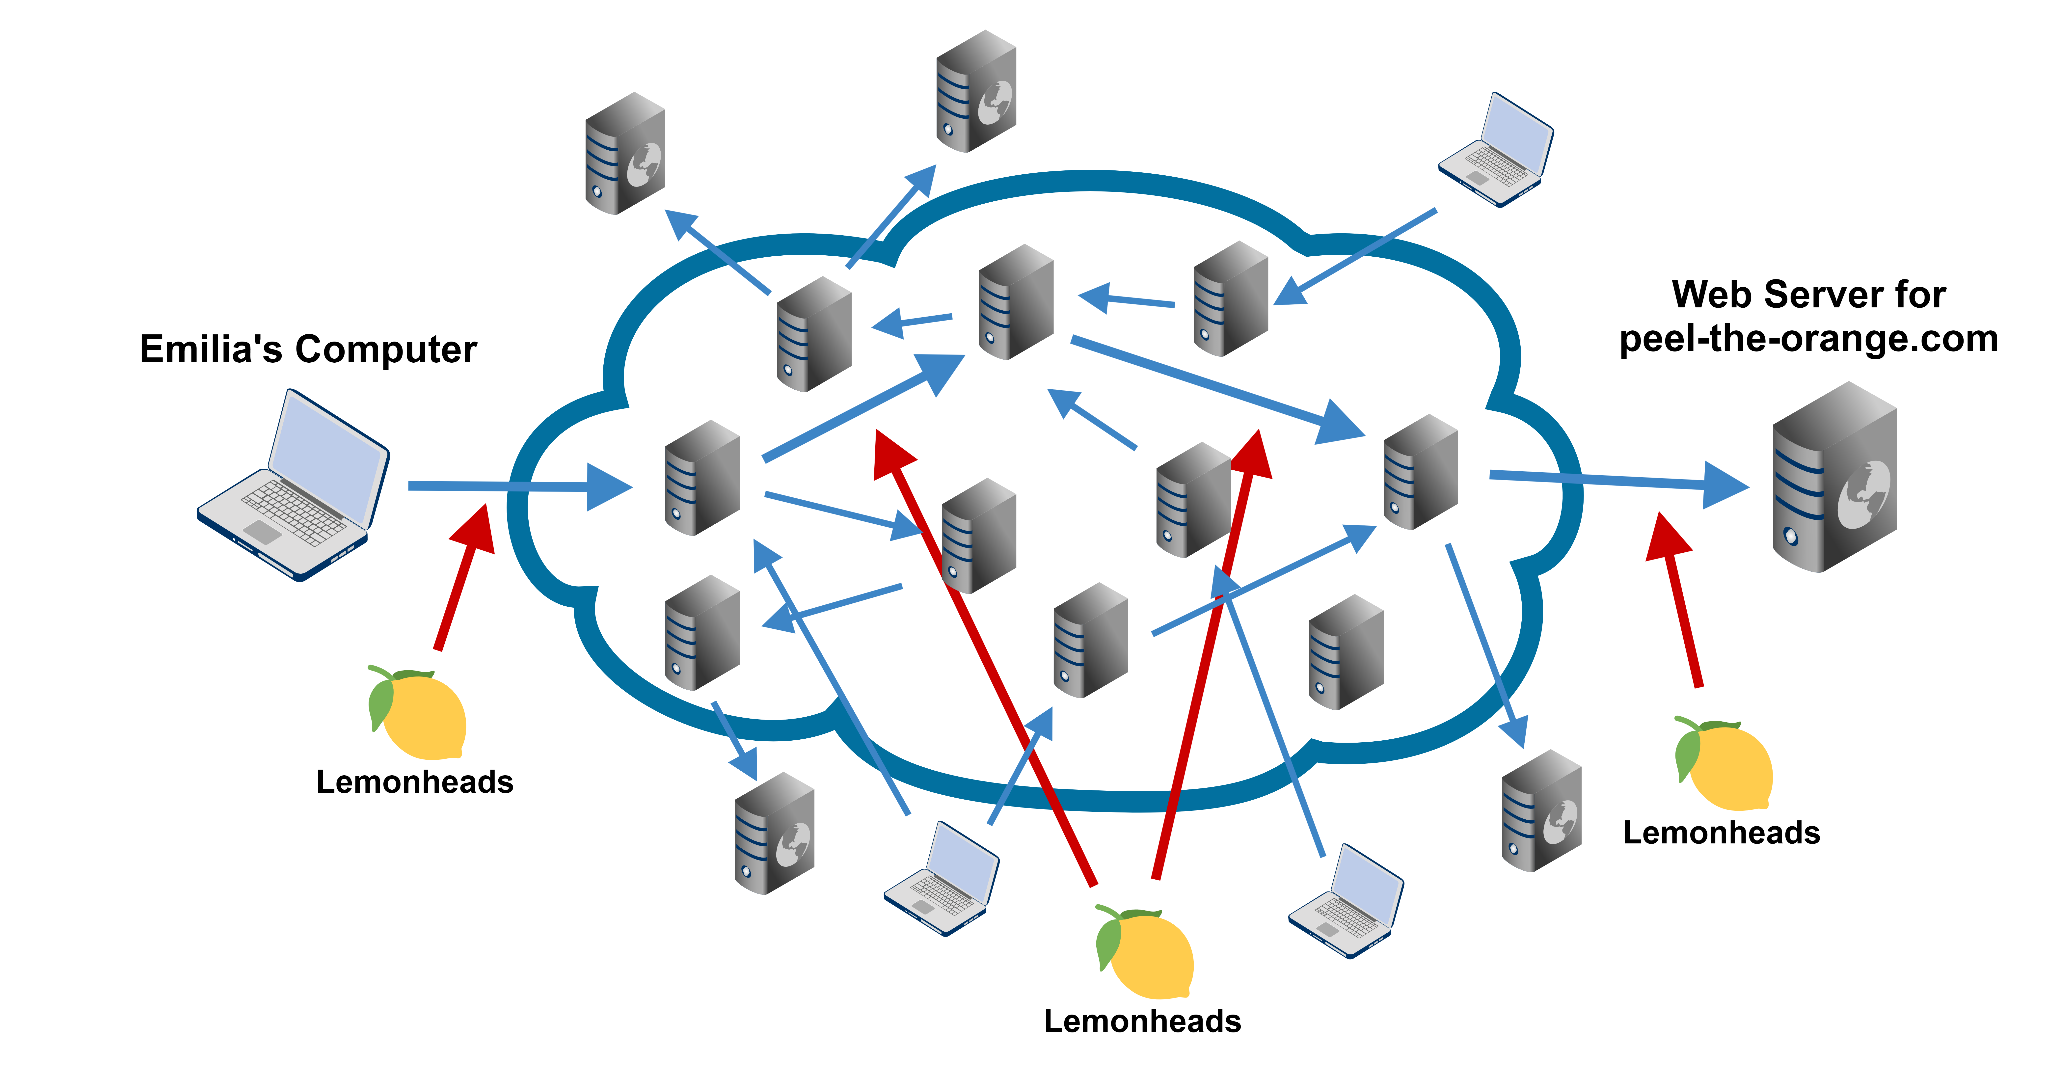 Figure 2 depicts Lemonheads as a global observer. The image shows the lemonheads with red arrows observing traffic between Emilia's computer and the web server for peel the orange. 